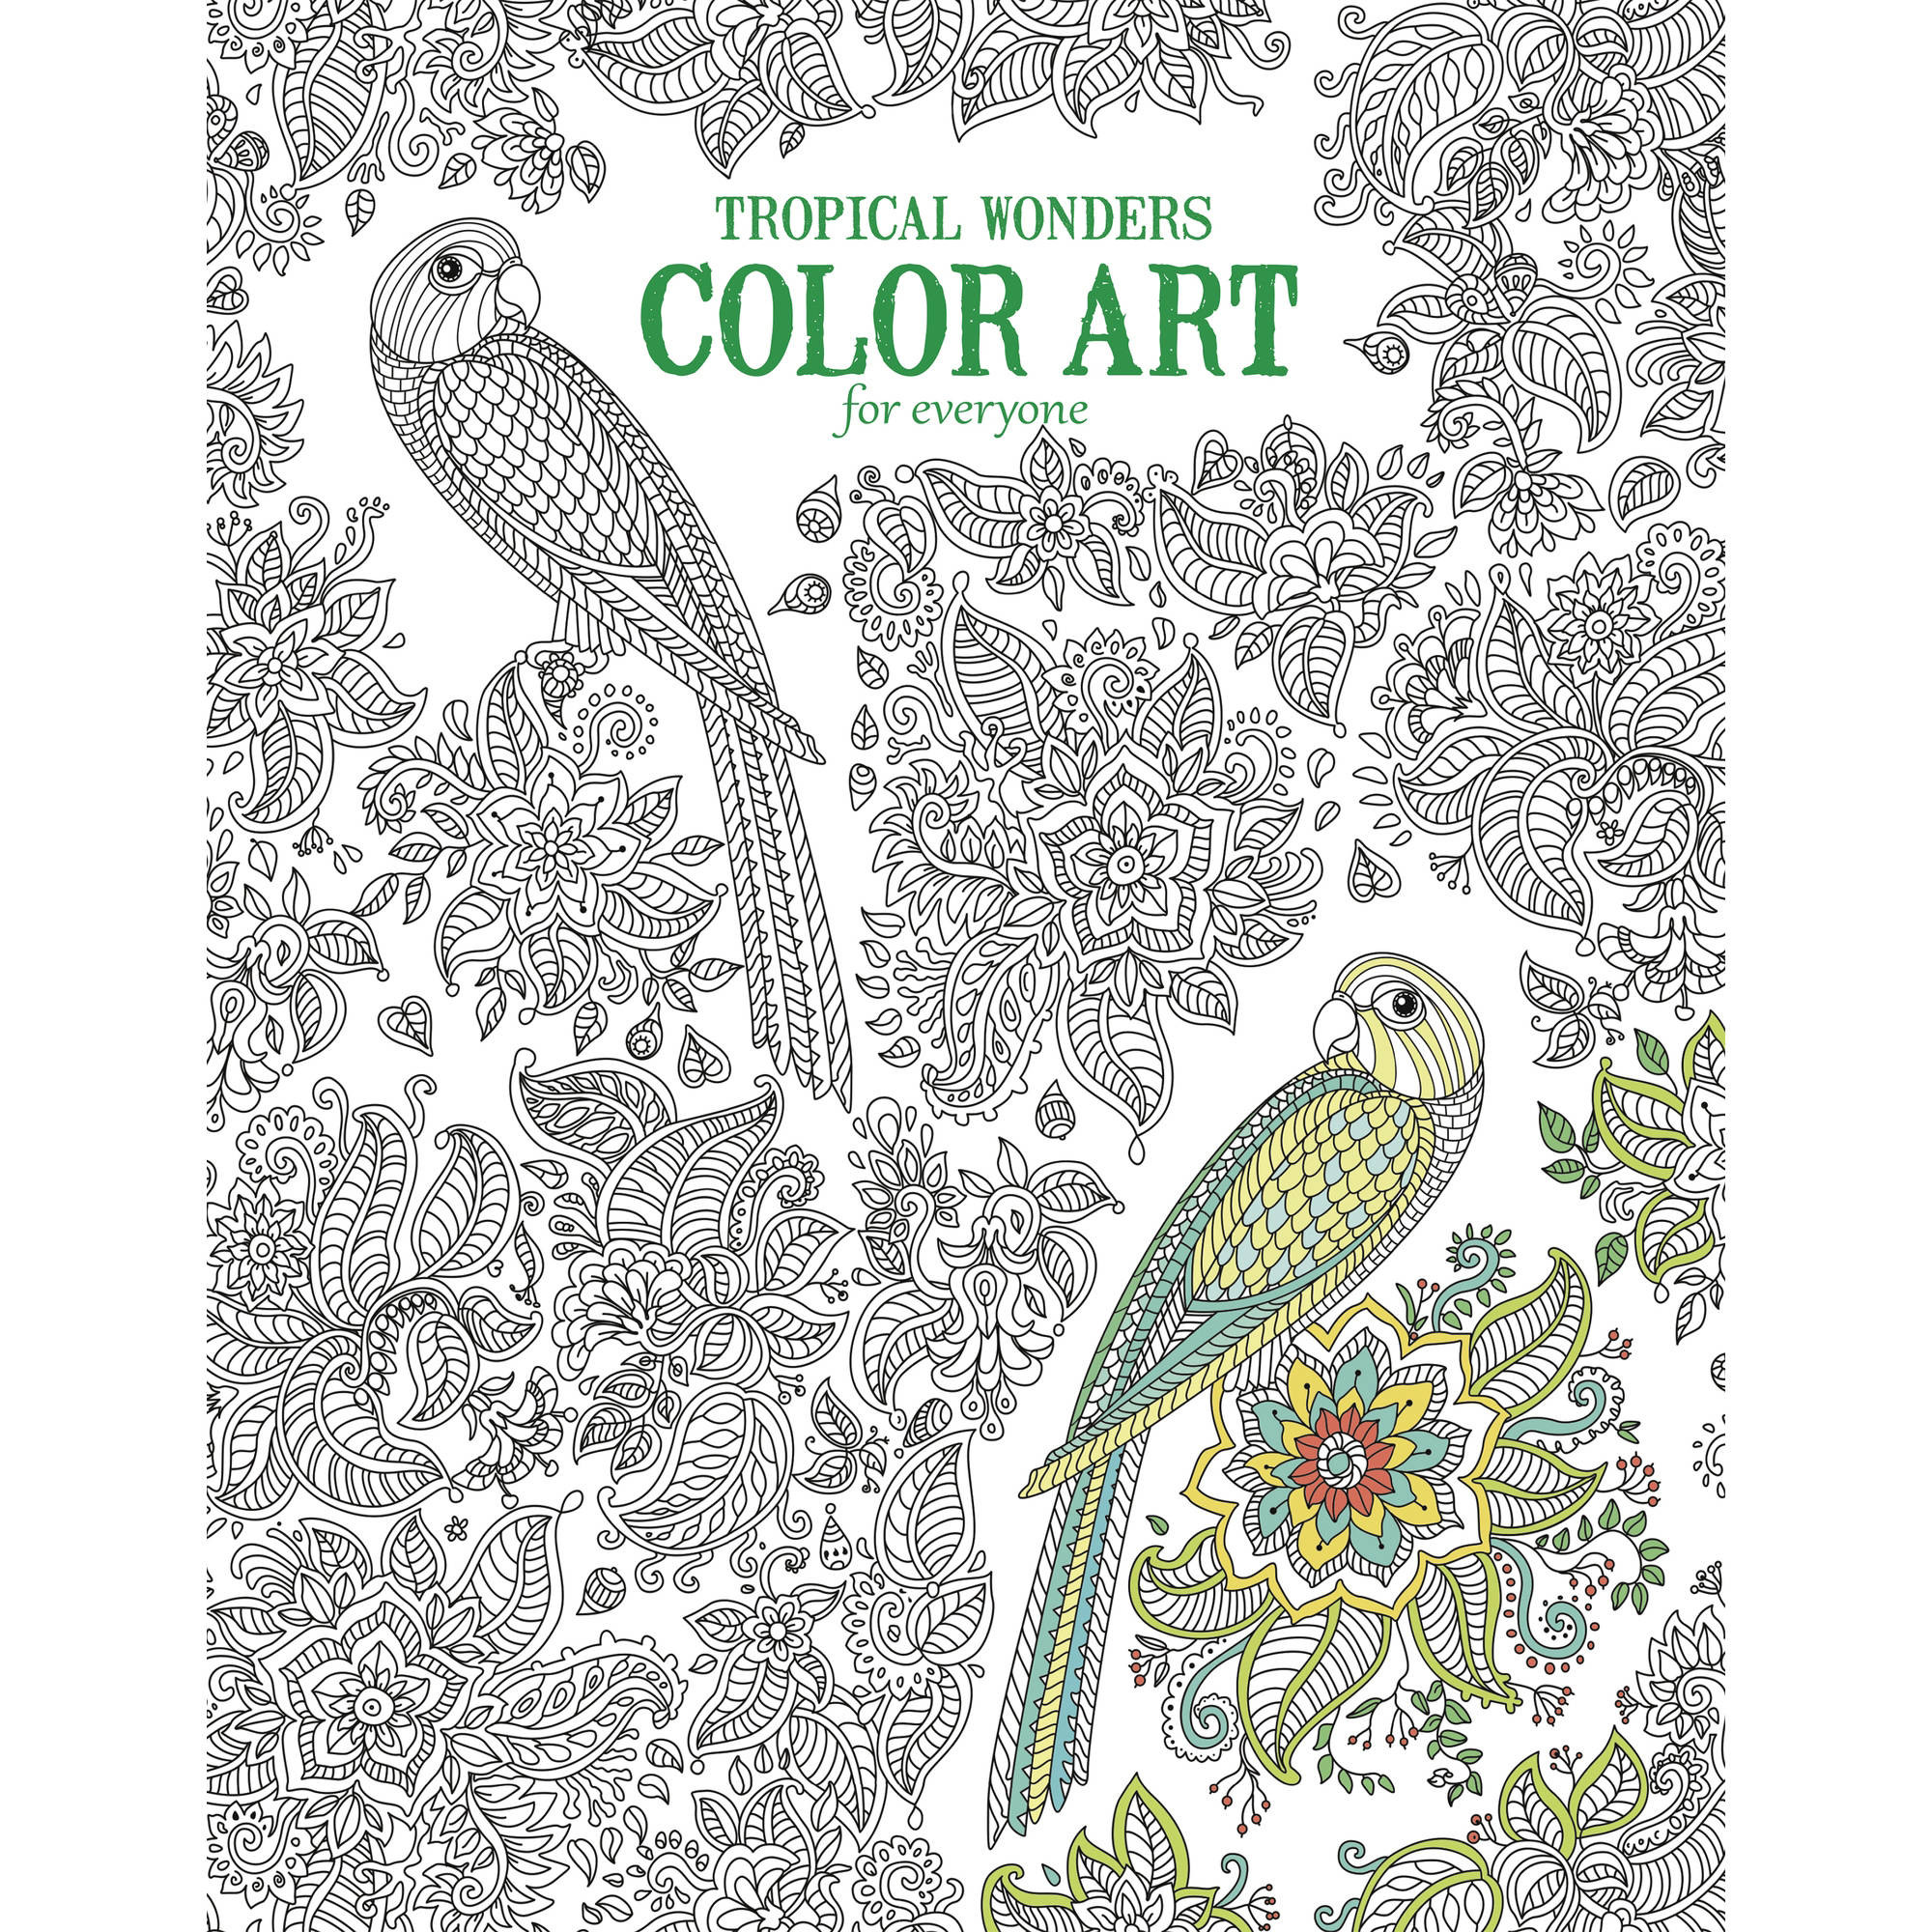 Coloring Book For Adults Walmart
 Leisure Arts Inc Color Art for Everyone Tropical Wonders